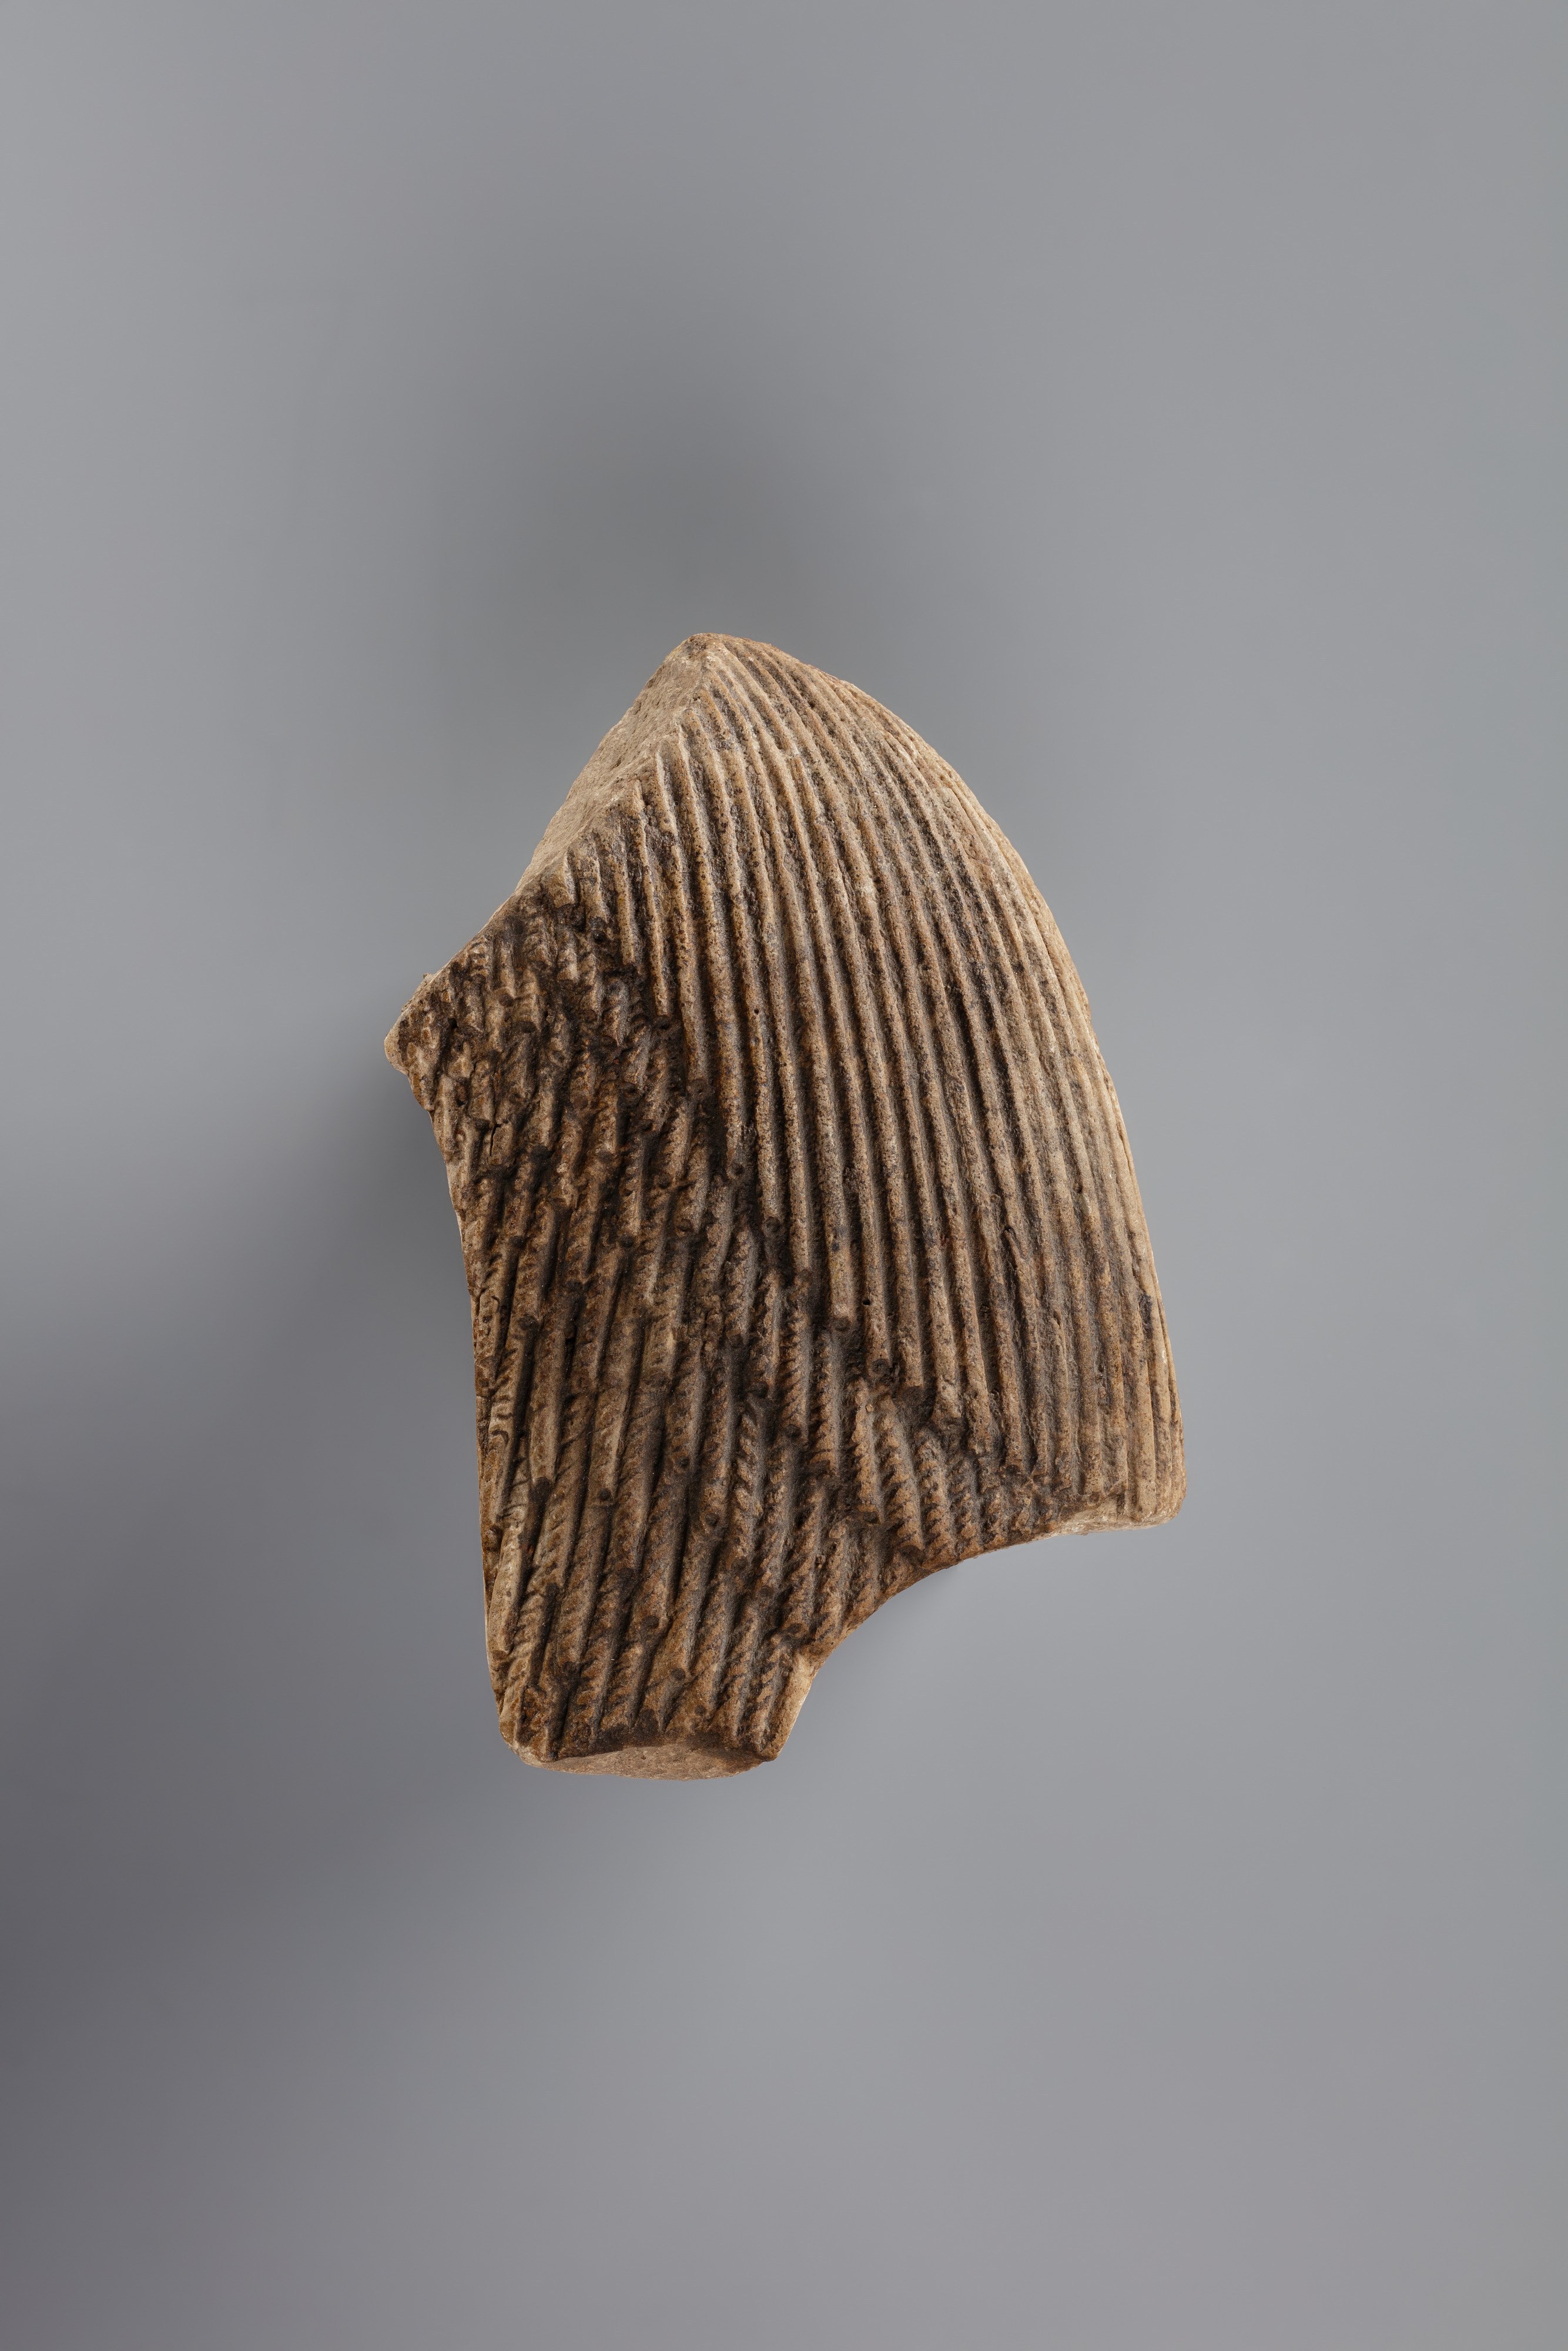 Tile fragment, part of a wig from a figure of the king | New Kingdom ...